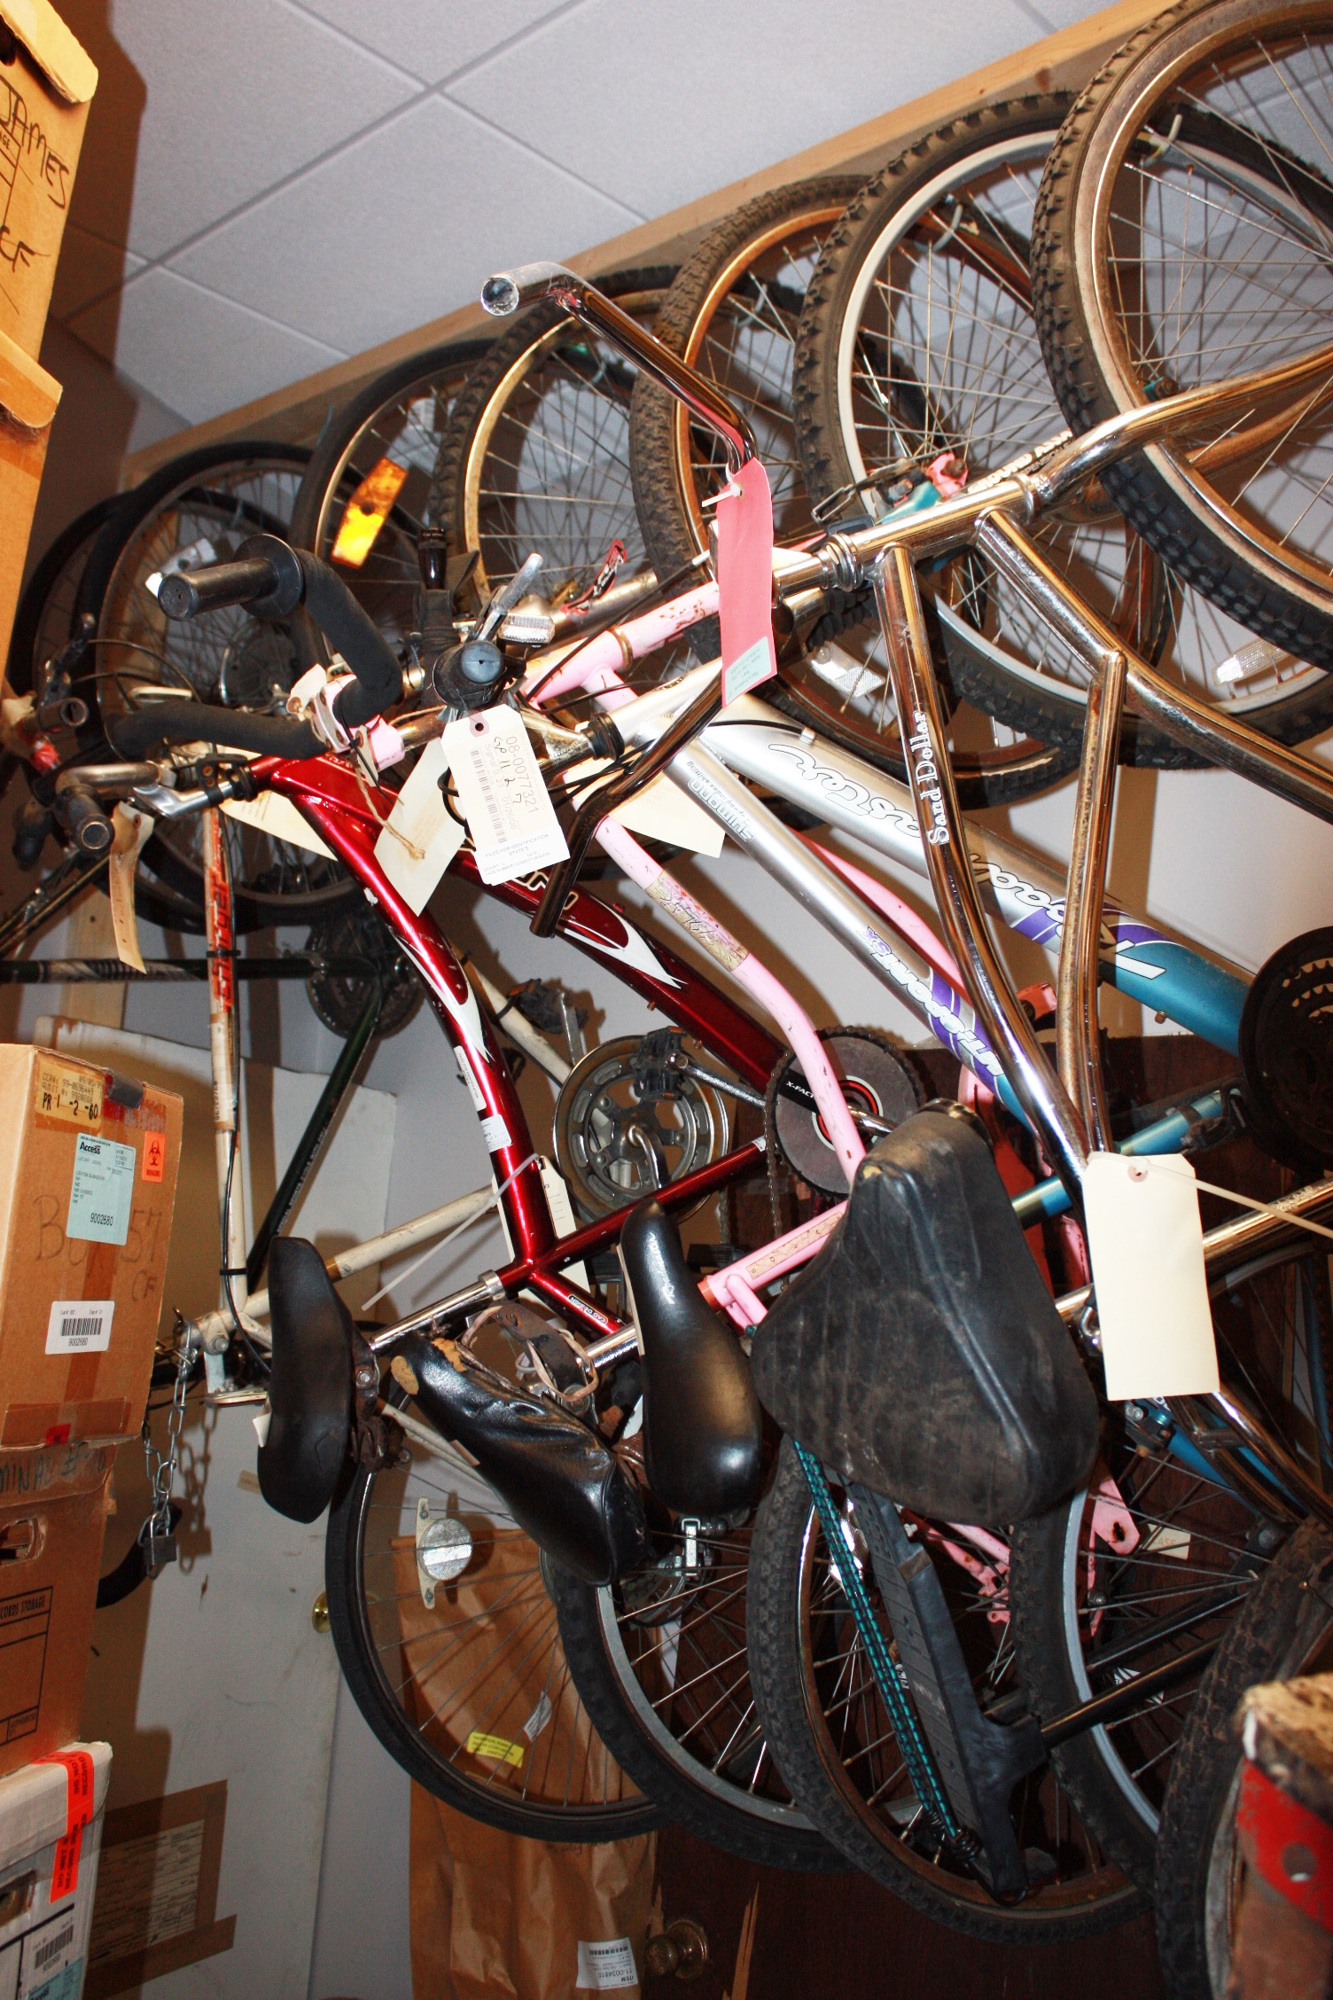 The Duval County Clerk of Courts evidence archive includes  bicycles that were entered into evidence during trials on charges ranging from drug offenses to murder.